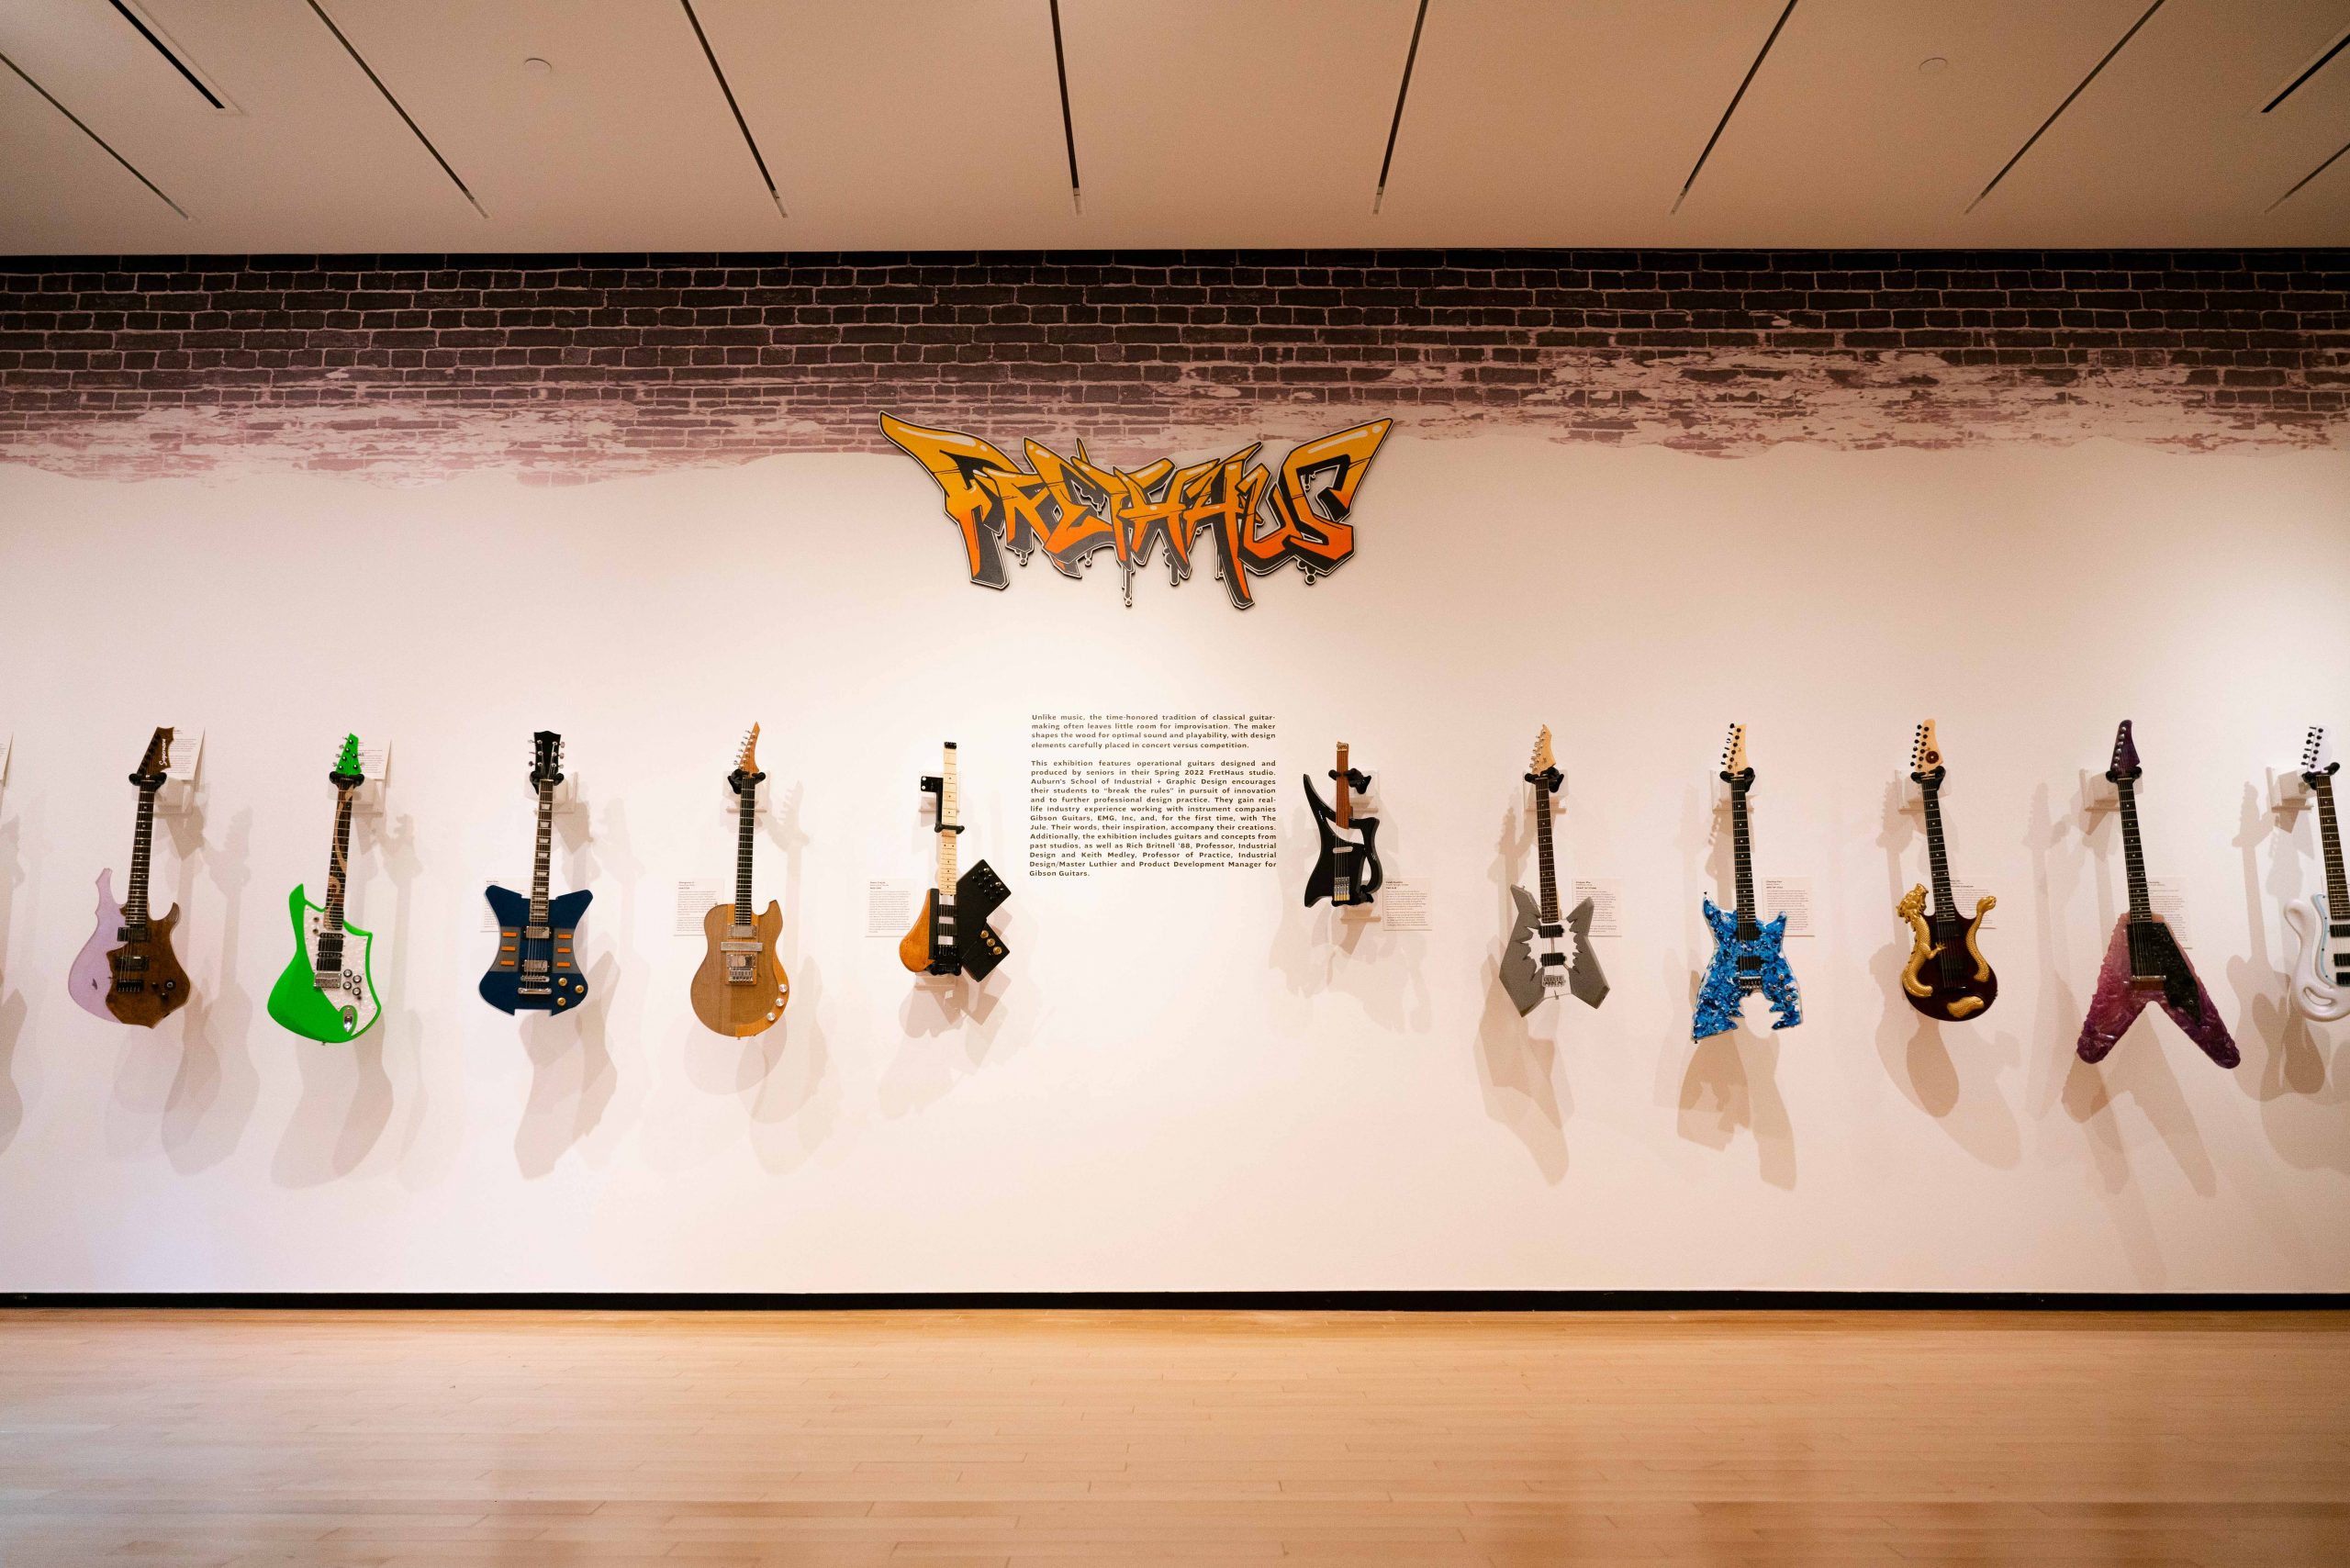 Uniquely decorated guitars hang on a wall with text describing the exhibition in the center and FretHaus in stylized lettering above